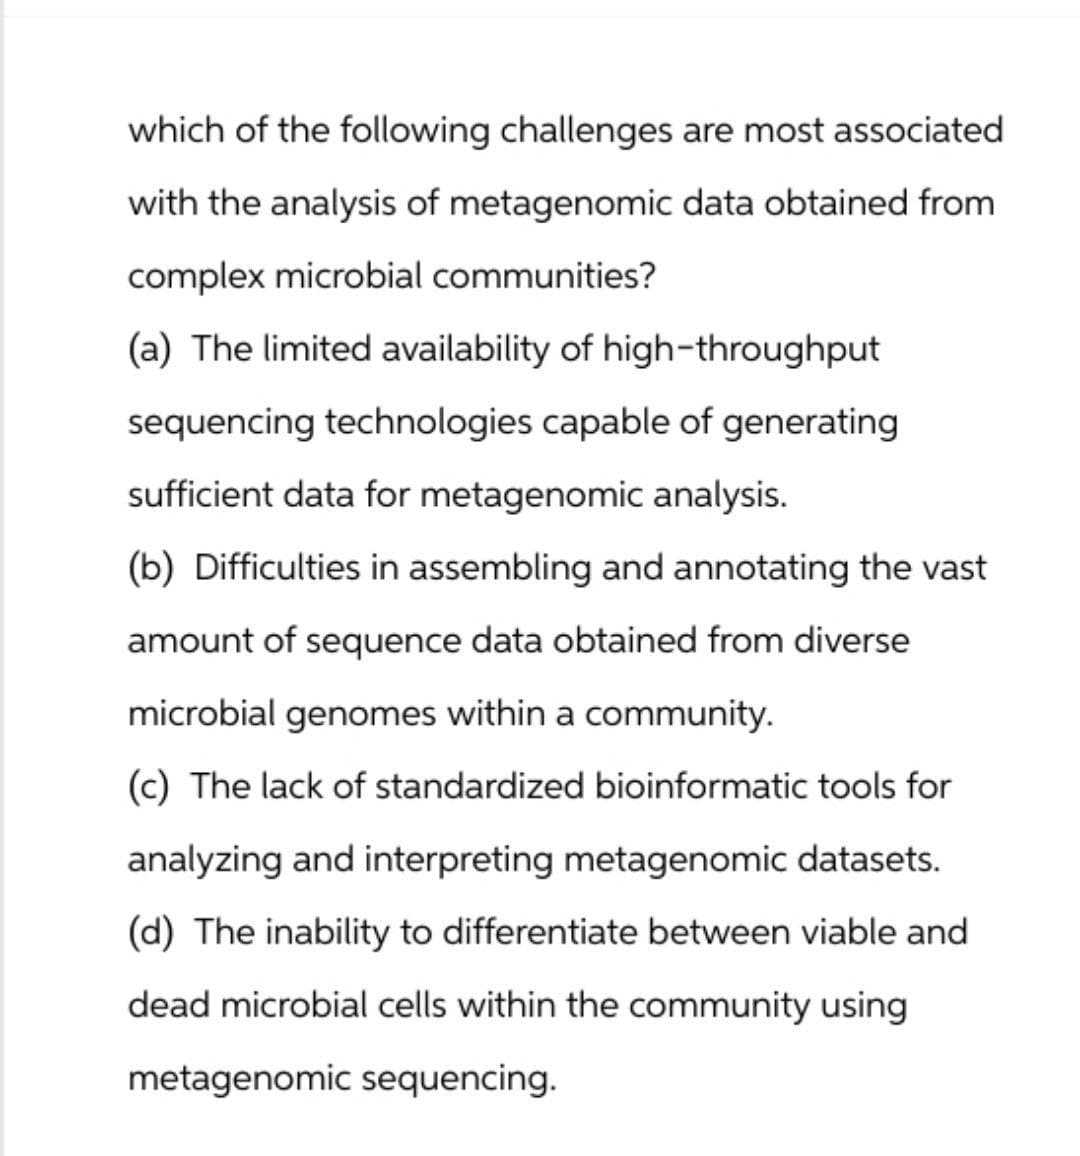 which of the following challenges are most associated
with the analysis of metagenomic data obtained from
complex microbial communities?
(a) The limited availability of high-throughput
sequencing technologies capable of generating
sufficient data for metagenomic analysis.
(b) Difficulties in assembling and annotating the vast
amount of sequence data obtained from diverse
microbial genomes within a community.
(c) The lack of standardized bioinformatic tools for
analyzing and interpreting metagenomic datasets.
(d) The inability to differentiate between viable and
dead microbial cells within the community using
metagenomic sequencing.